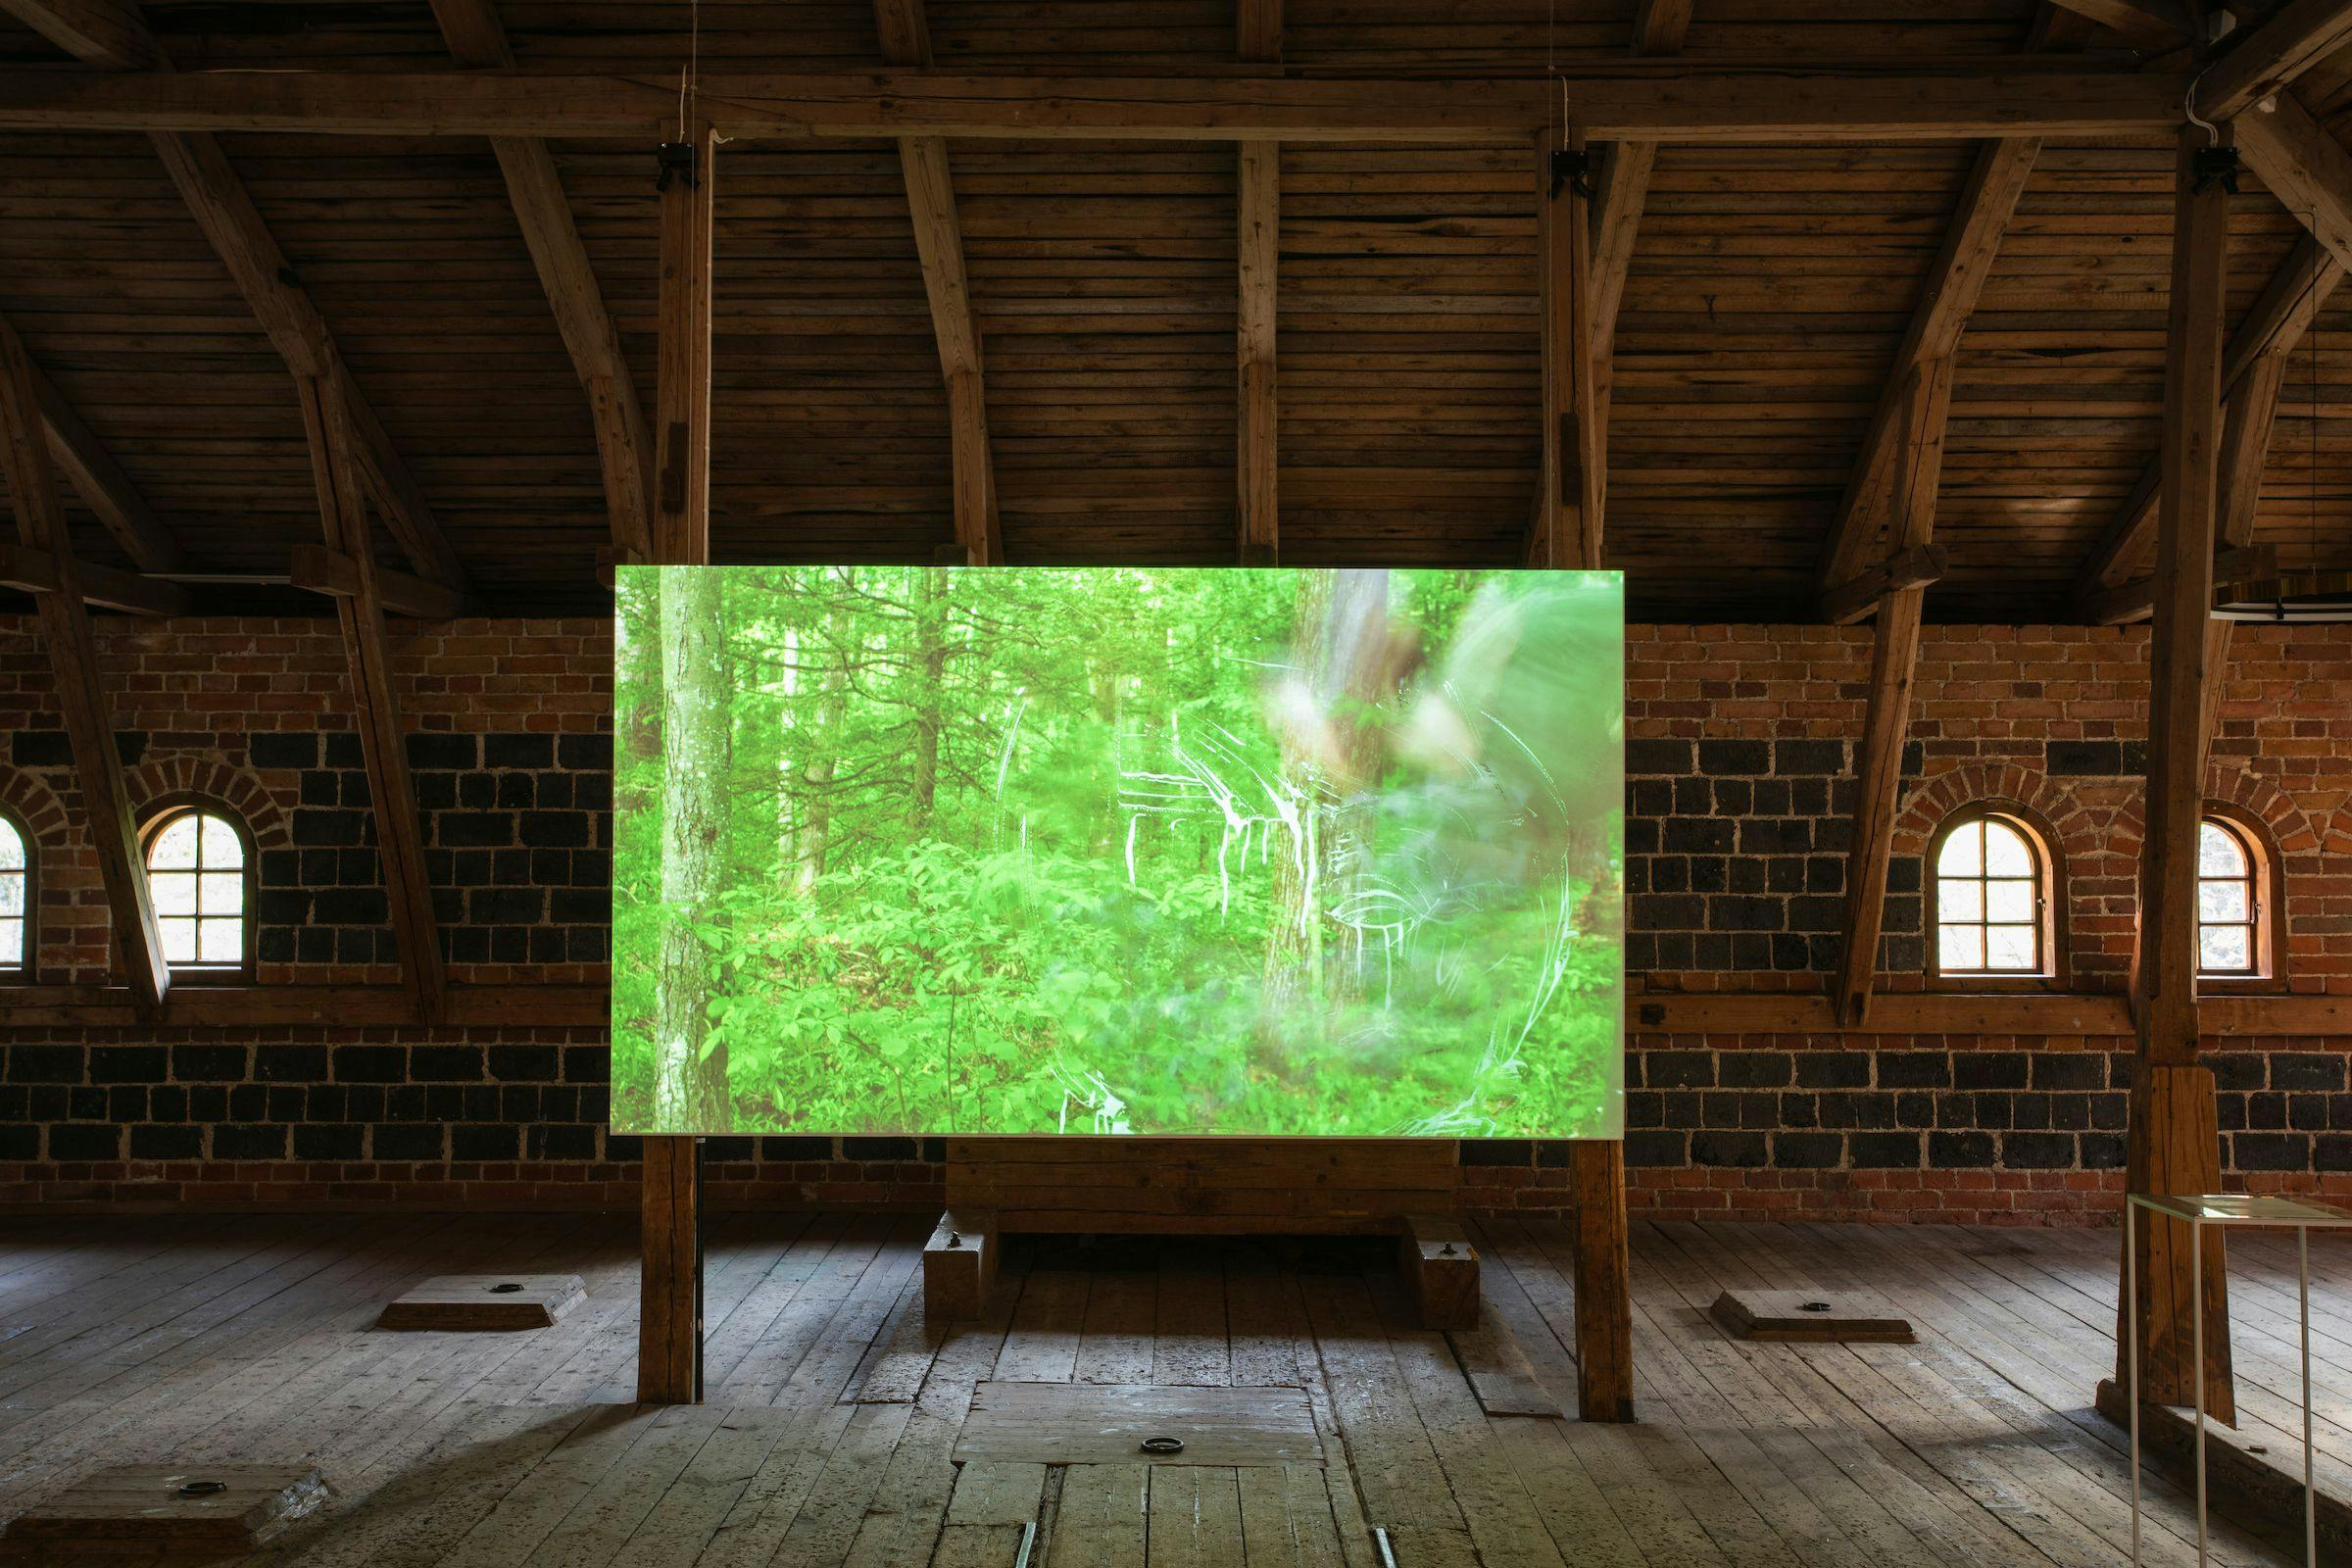 a video art work projected onto a wooden screen inside an unconventional gallery space that looks like the loft of a barn.